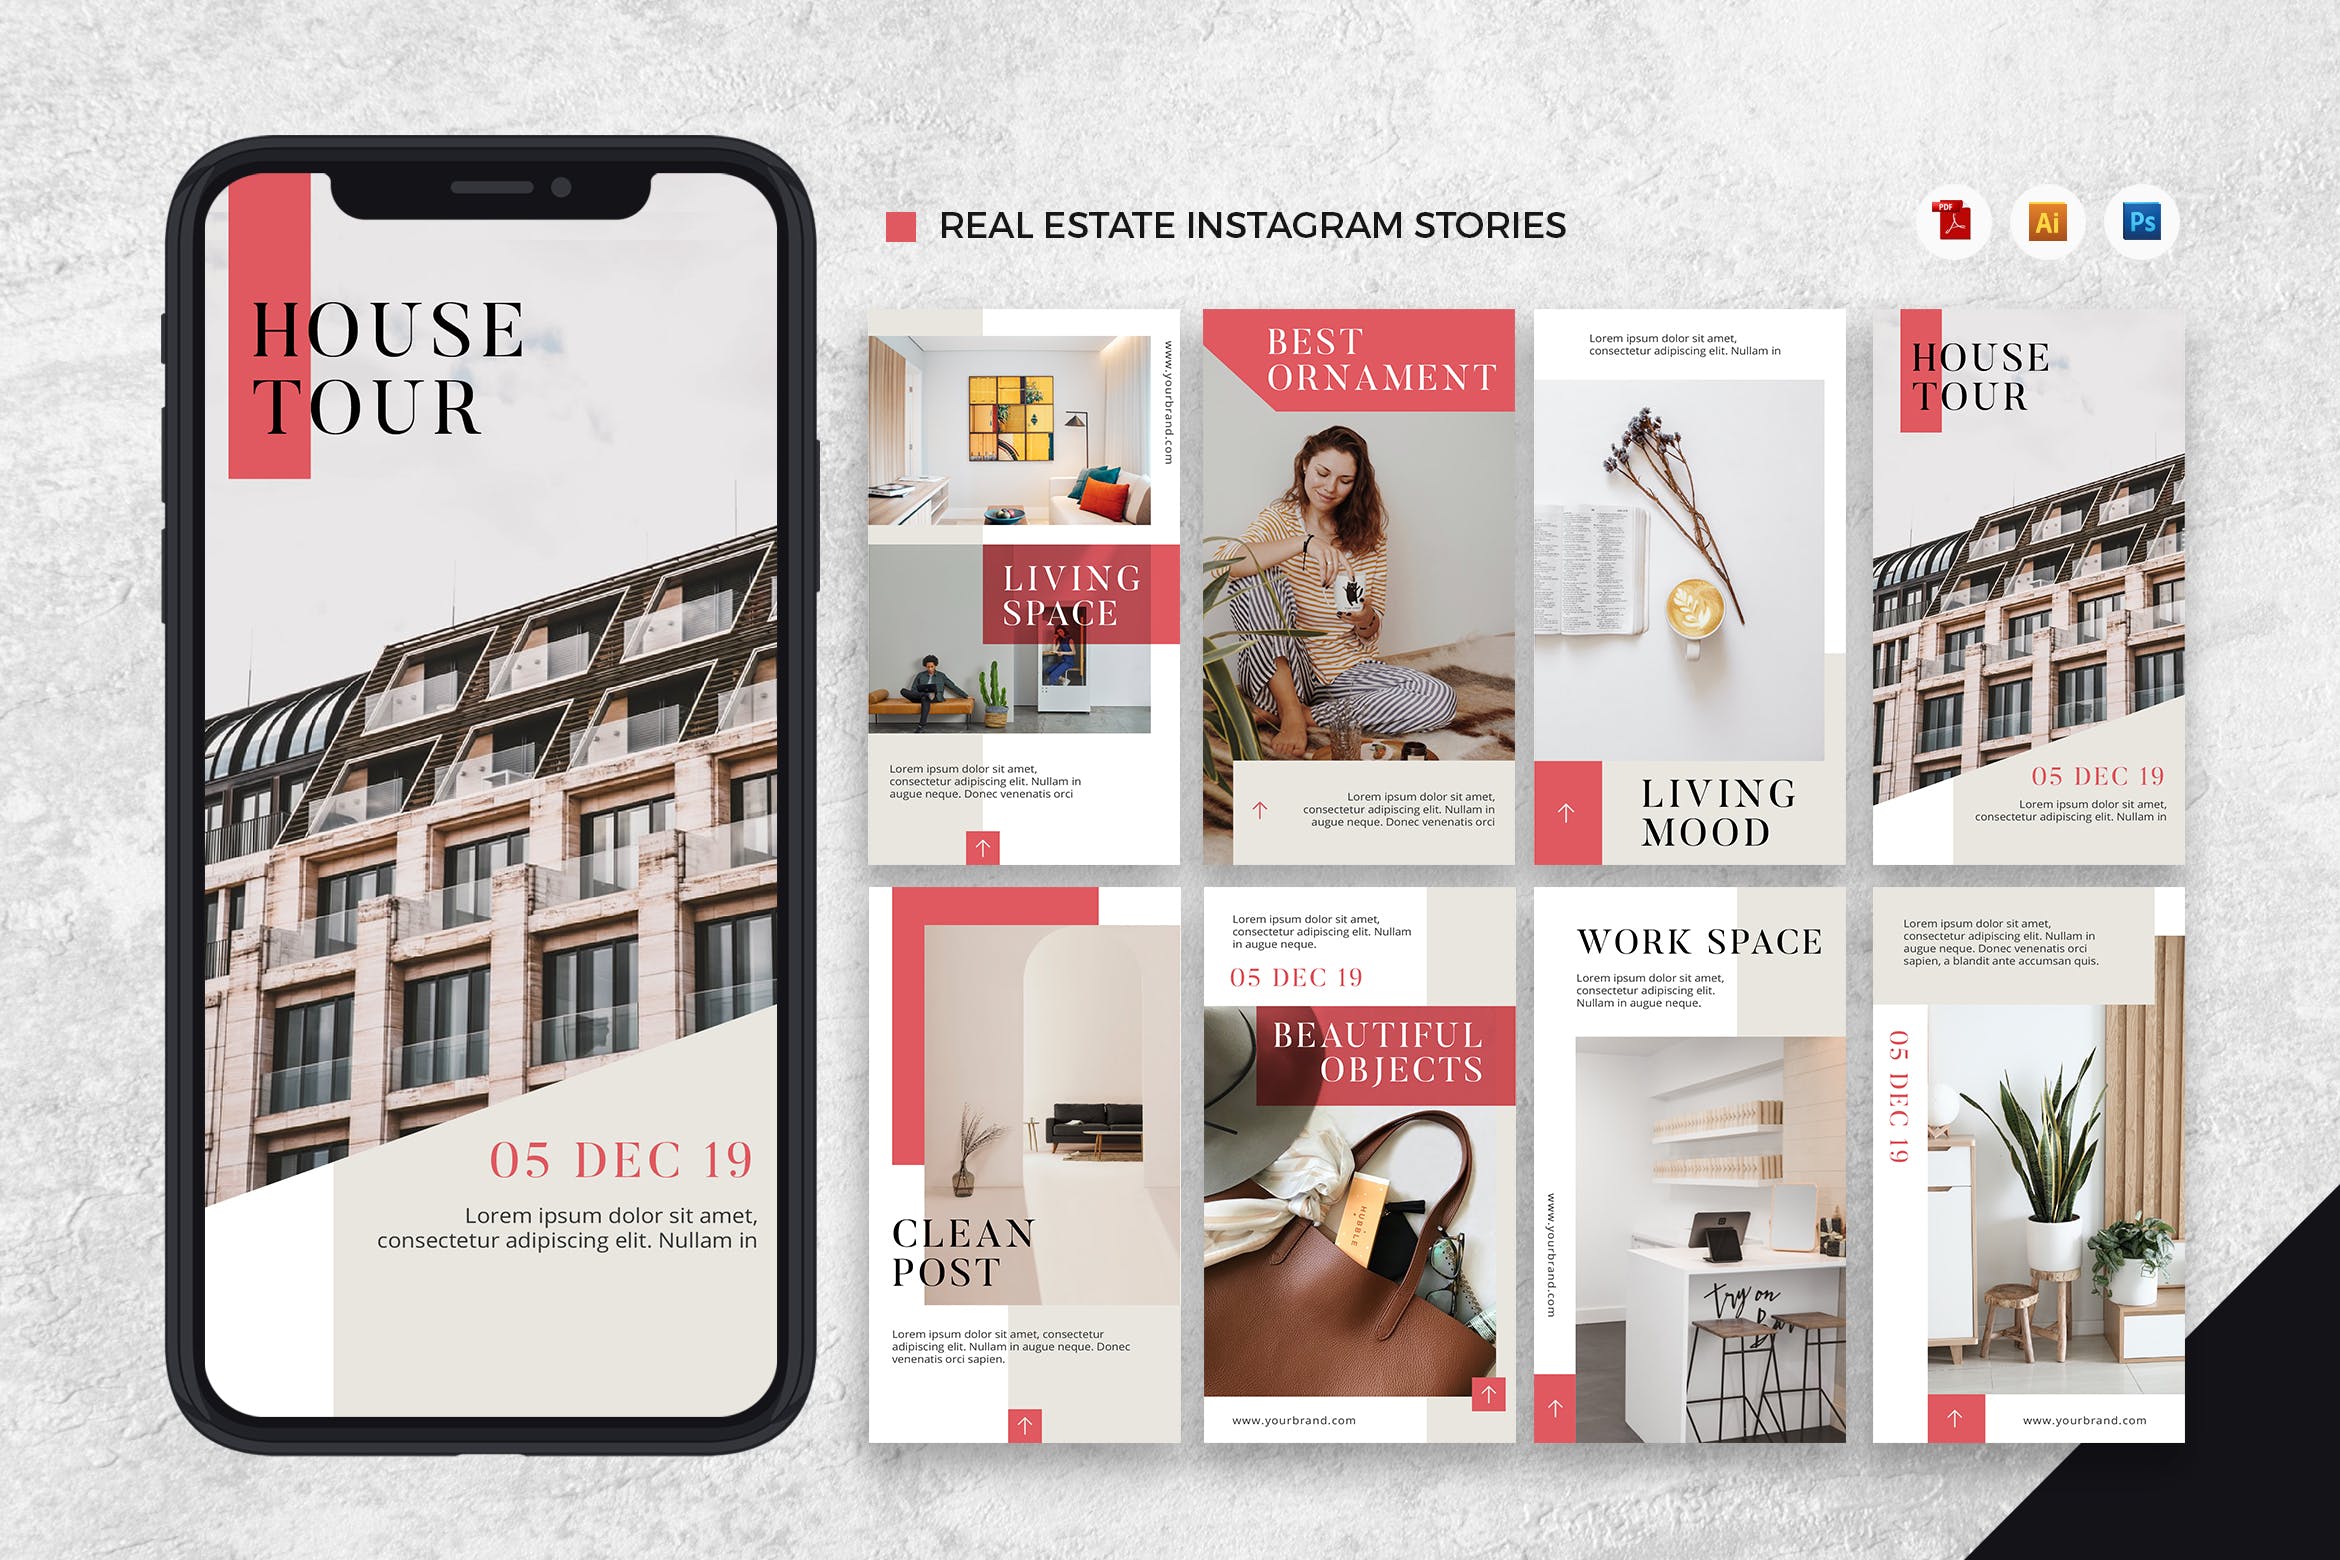 Instagrams设计房地产品牌故事推广设计模板大洋岛精选[AI&PSD] Real Estate Instagram Stories AI and PSD Template插图